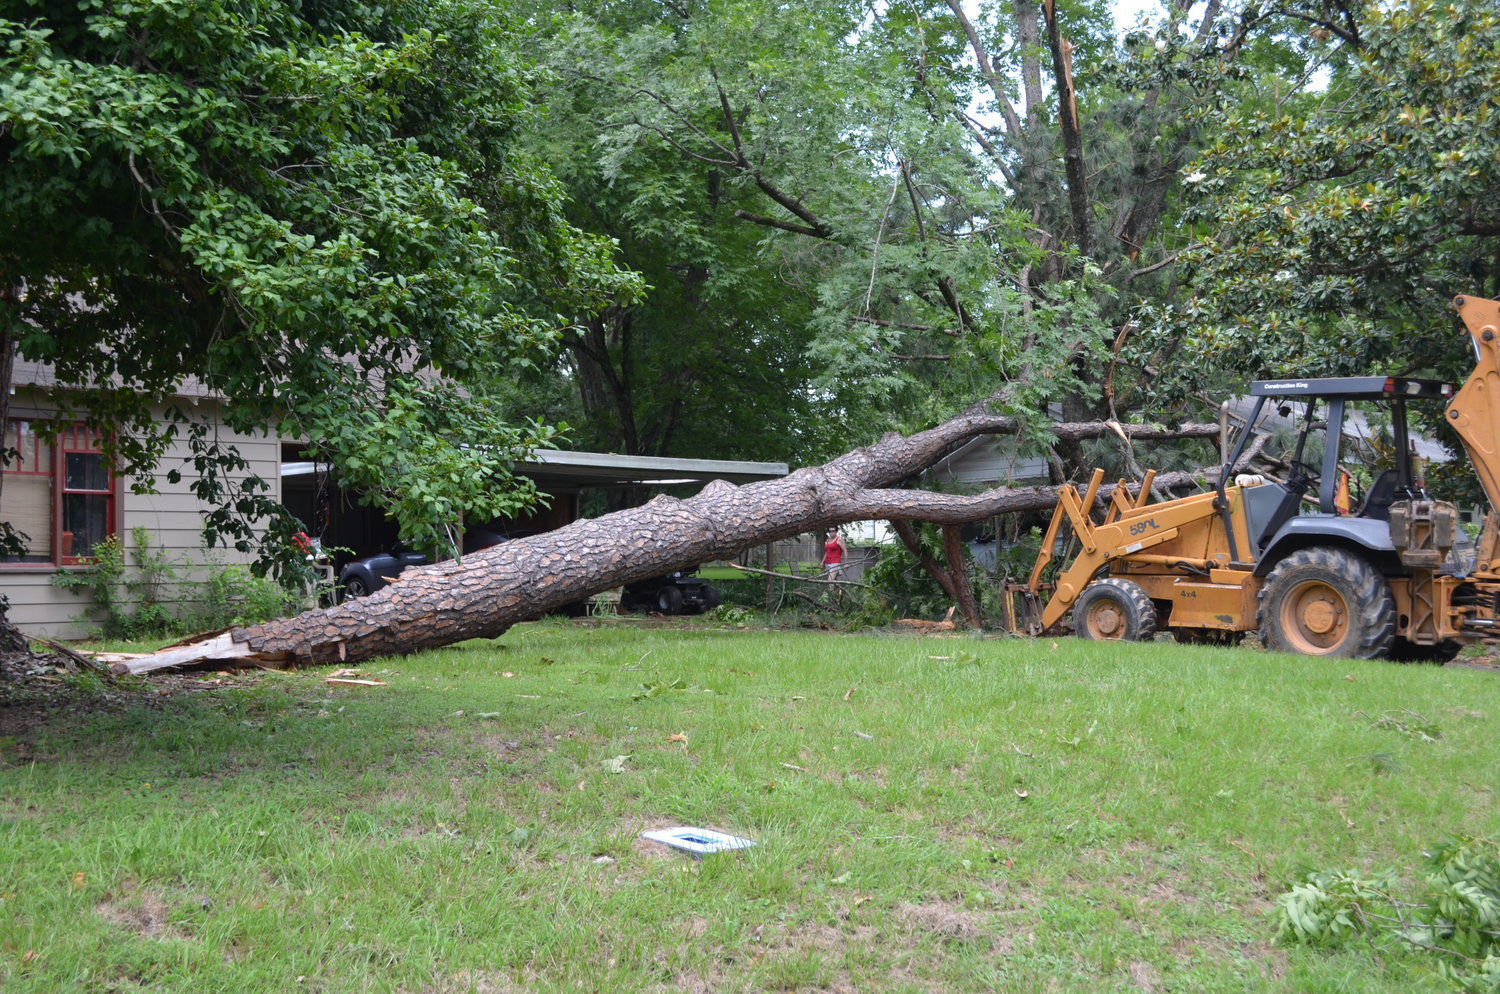 A powerful thunderstorm hit Wood County just before dawn on Wednesday, knocking down trees and power lines and interrupting electrical service to 80 customers in Wood County, according to Wood County Electric Cooperative. Here, a massive pine tree was blown over at a house on Mimosa Street in Mineola. A crew was removing the tree Wednesday afternoon. (Monitor photo by Hank Murphy).